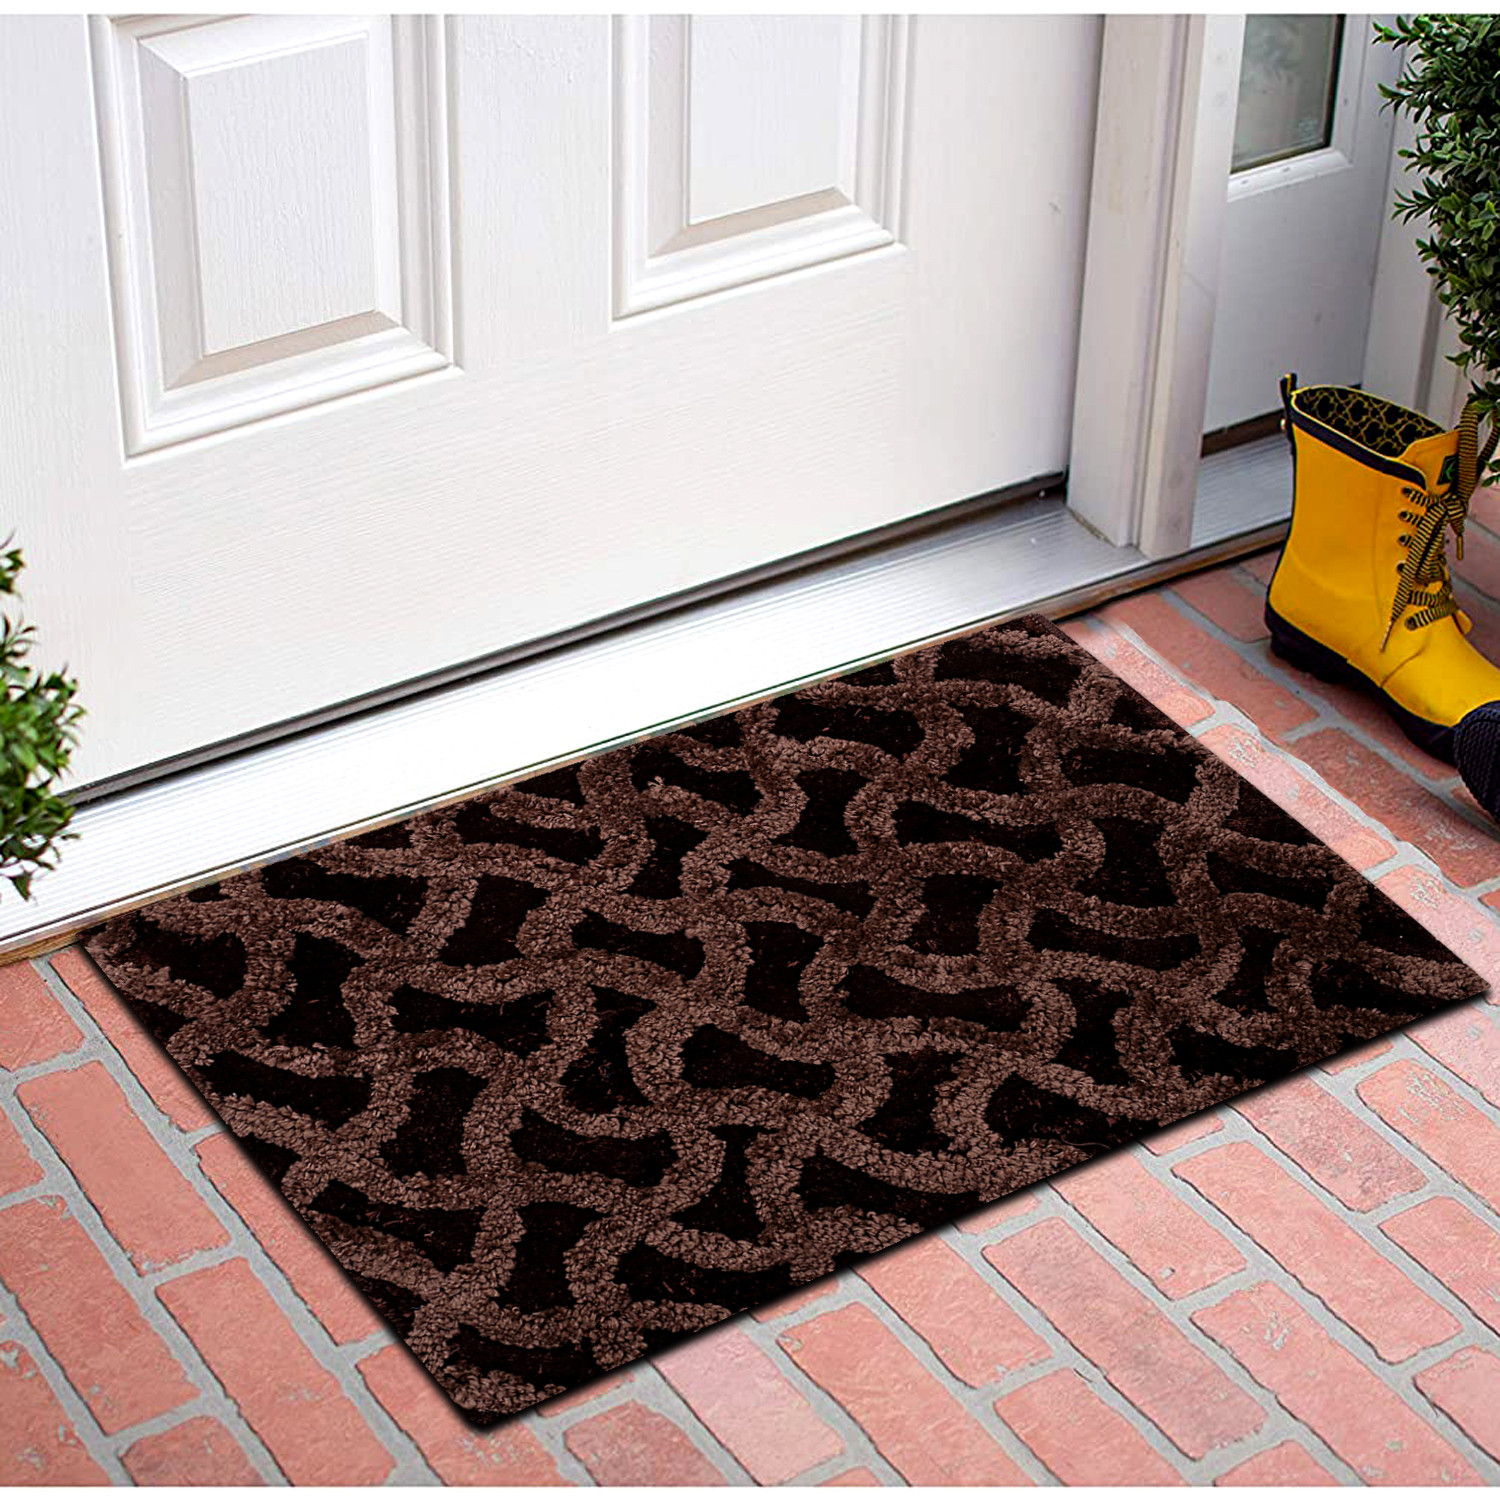 Kuber Industries Soft, lightweigth, Washable, Non Slip Doormat Entrance Rug Dirt Trapper Mat Shoes Scraper for Entry, Patio, Porch- Pack of 3 (Brown & Dark Brown & Red)